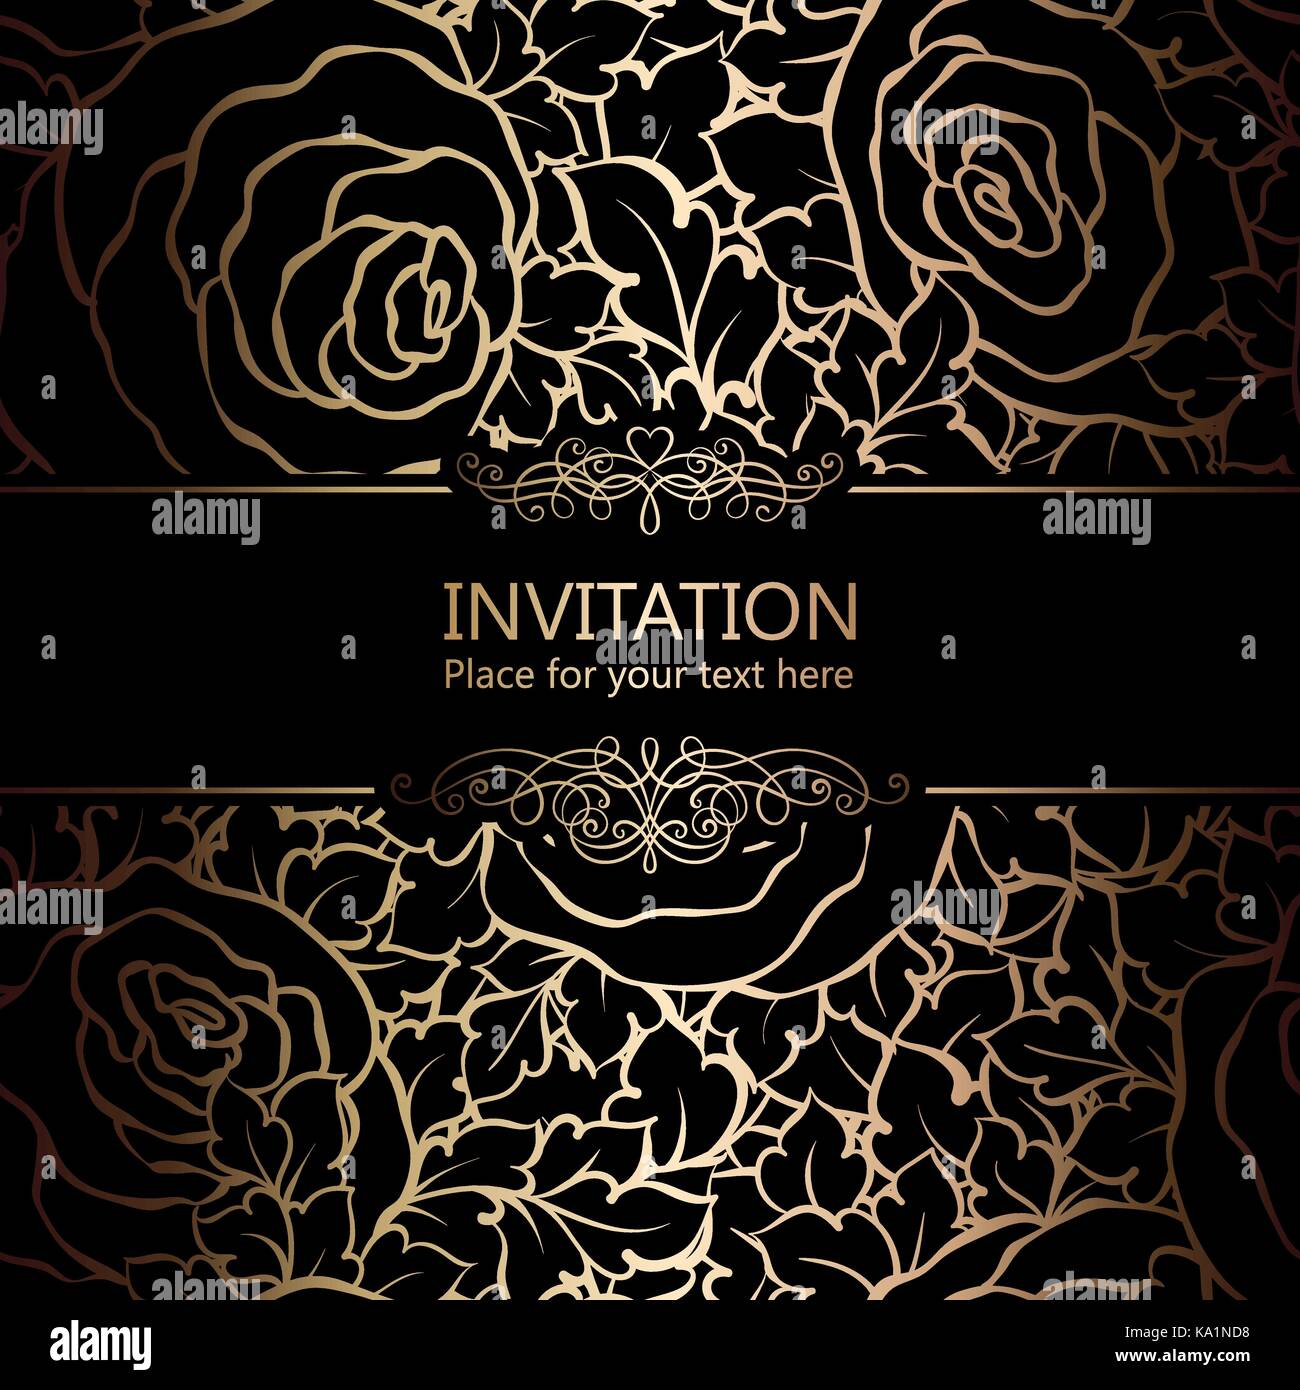 Abstract background with roses, luxury black and gold vintage frame, victorian banner, damask floral wallpaper ornaments, invitation card, baroque sty Stock Vector